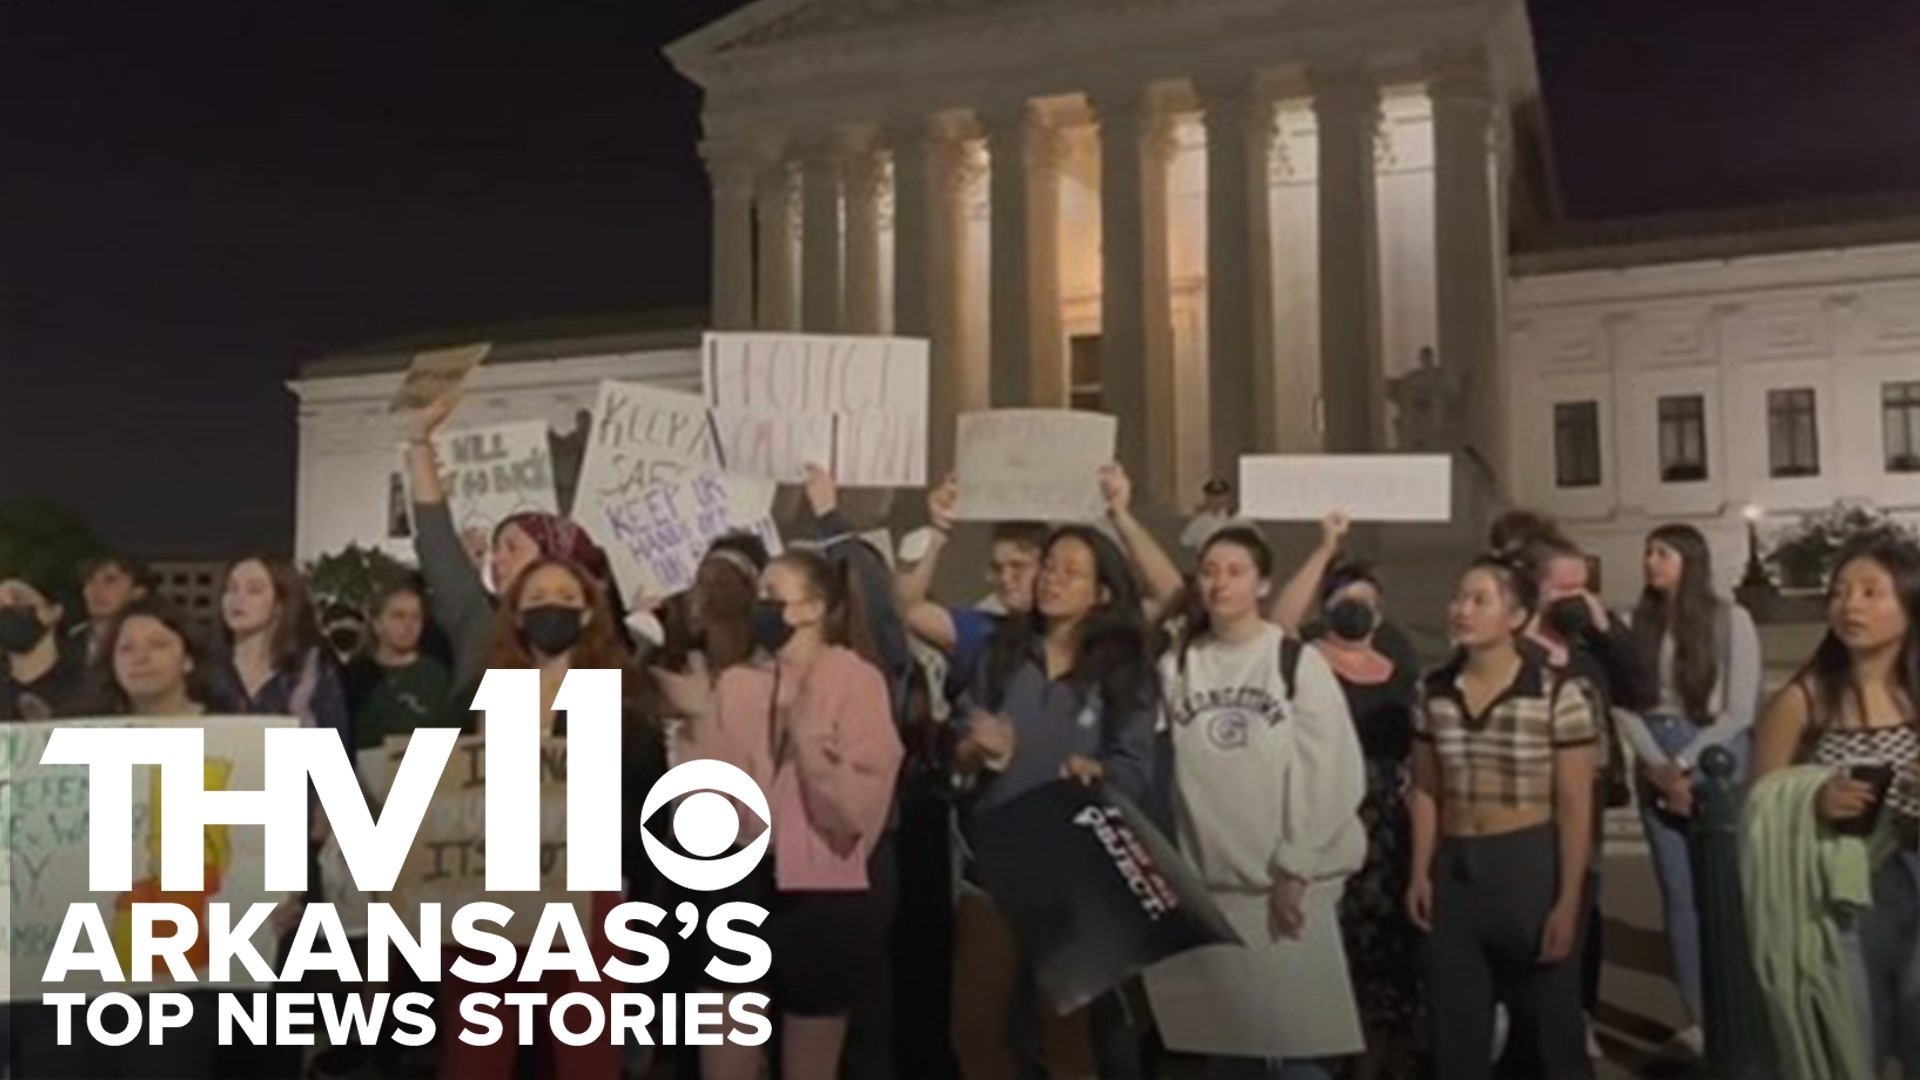 Sarah Horbacewicz reports on the top news stories in Arkansas, including the leaked draft that could potentially overturn Roe V. Wade.